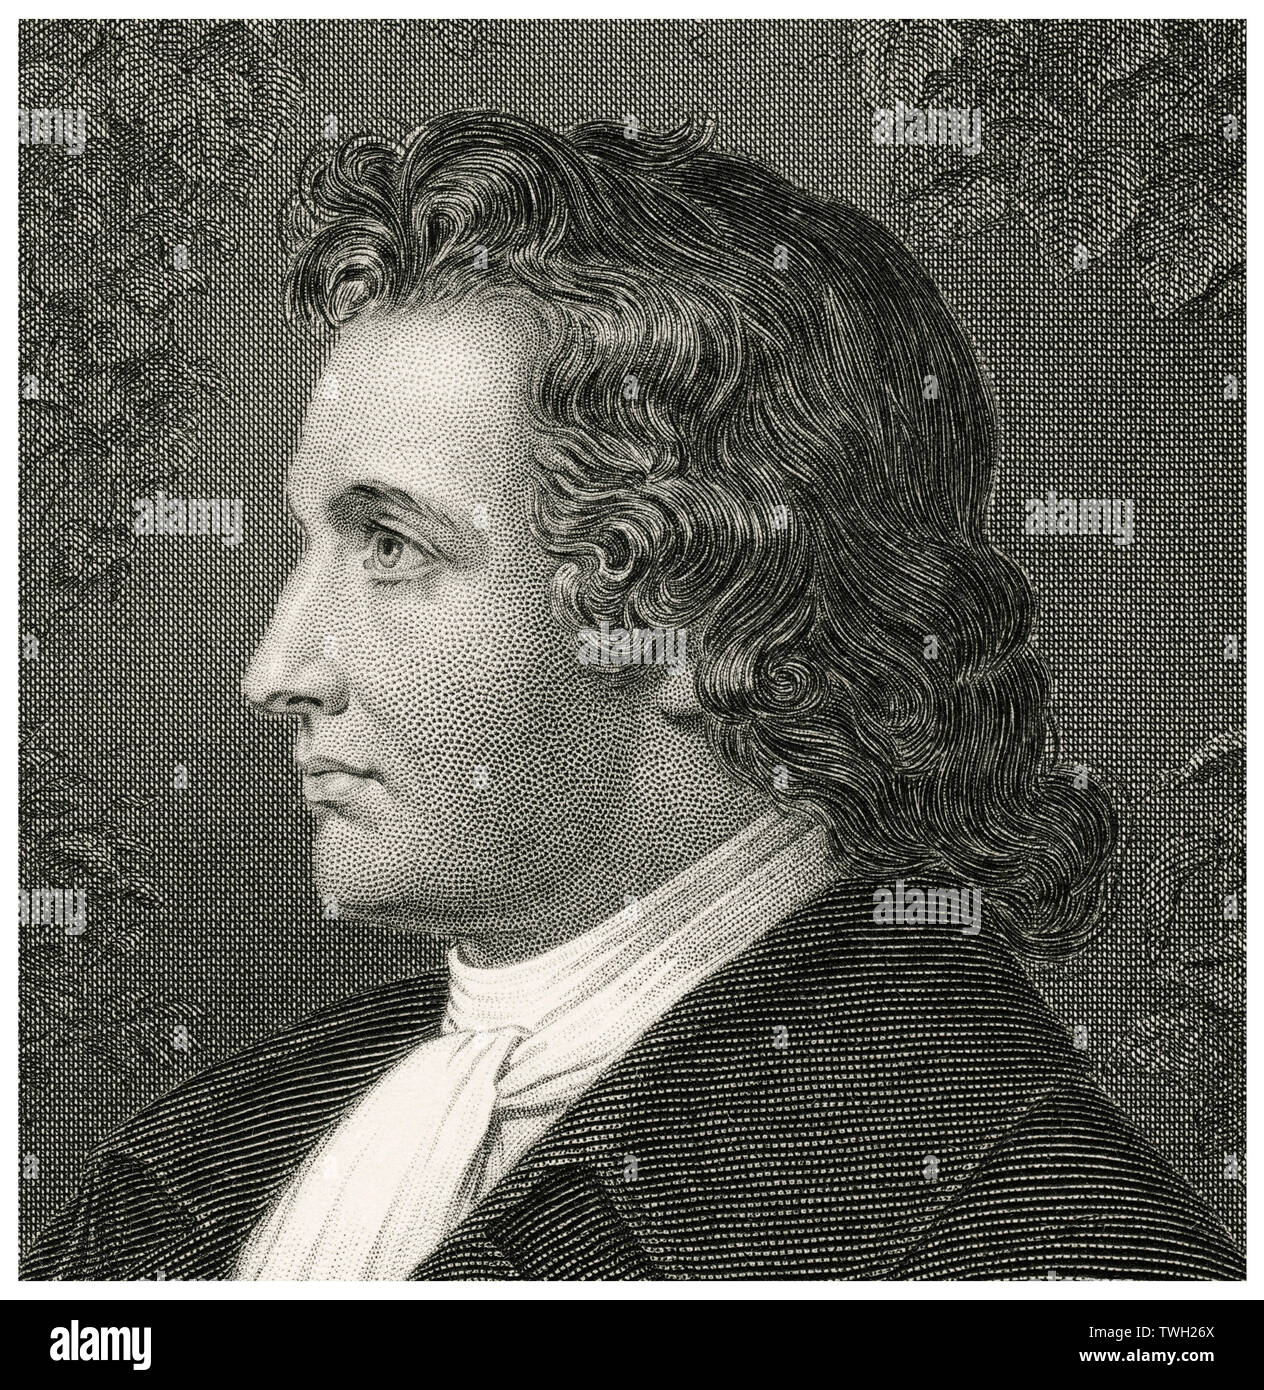 Johann Wolfgang von Goethe (1749-1832), German Writer and Statesman, Head and Shoulders Portrait, Steel Engraving, Portrait Gallery of Eminent Men and Women of Europe and America by Evert A. Duyckinck, Published by Henry J. Johnson, Johnson, Wilson & Company, New York, 1873 Stock Photo